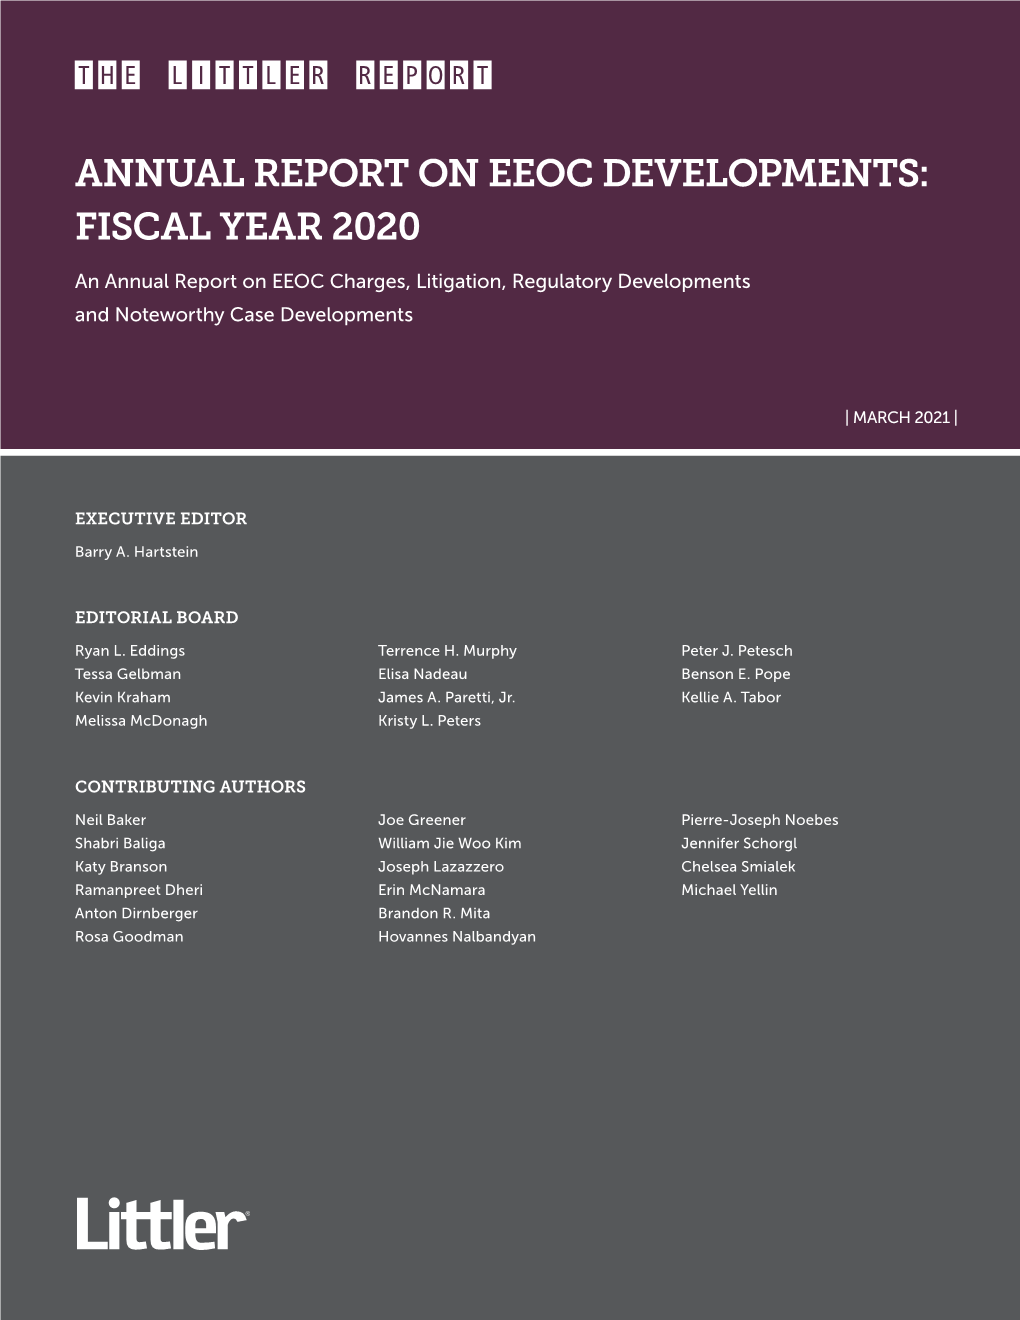 Annual Report on Eeoc Developments: Fiscal Year 2020